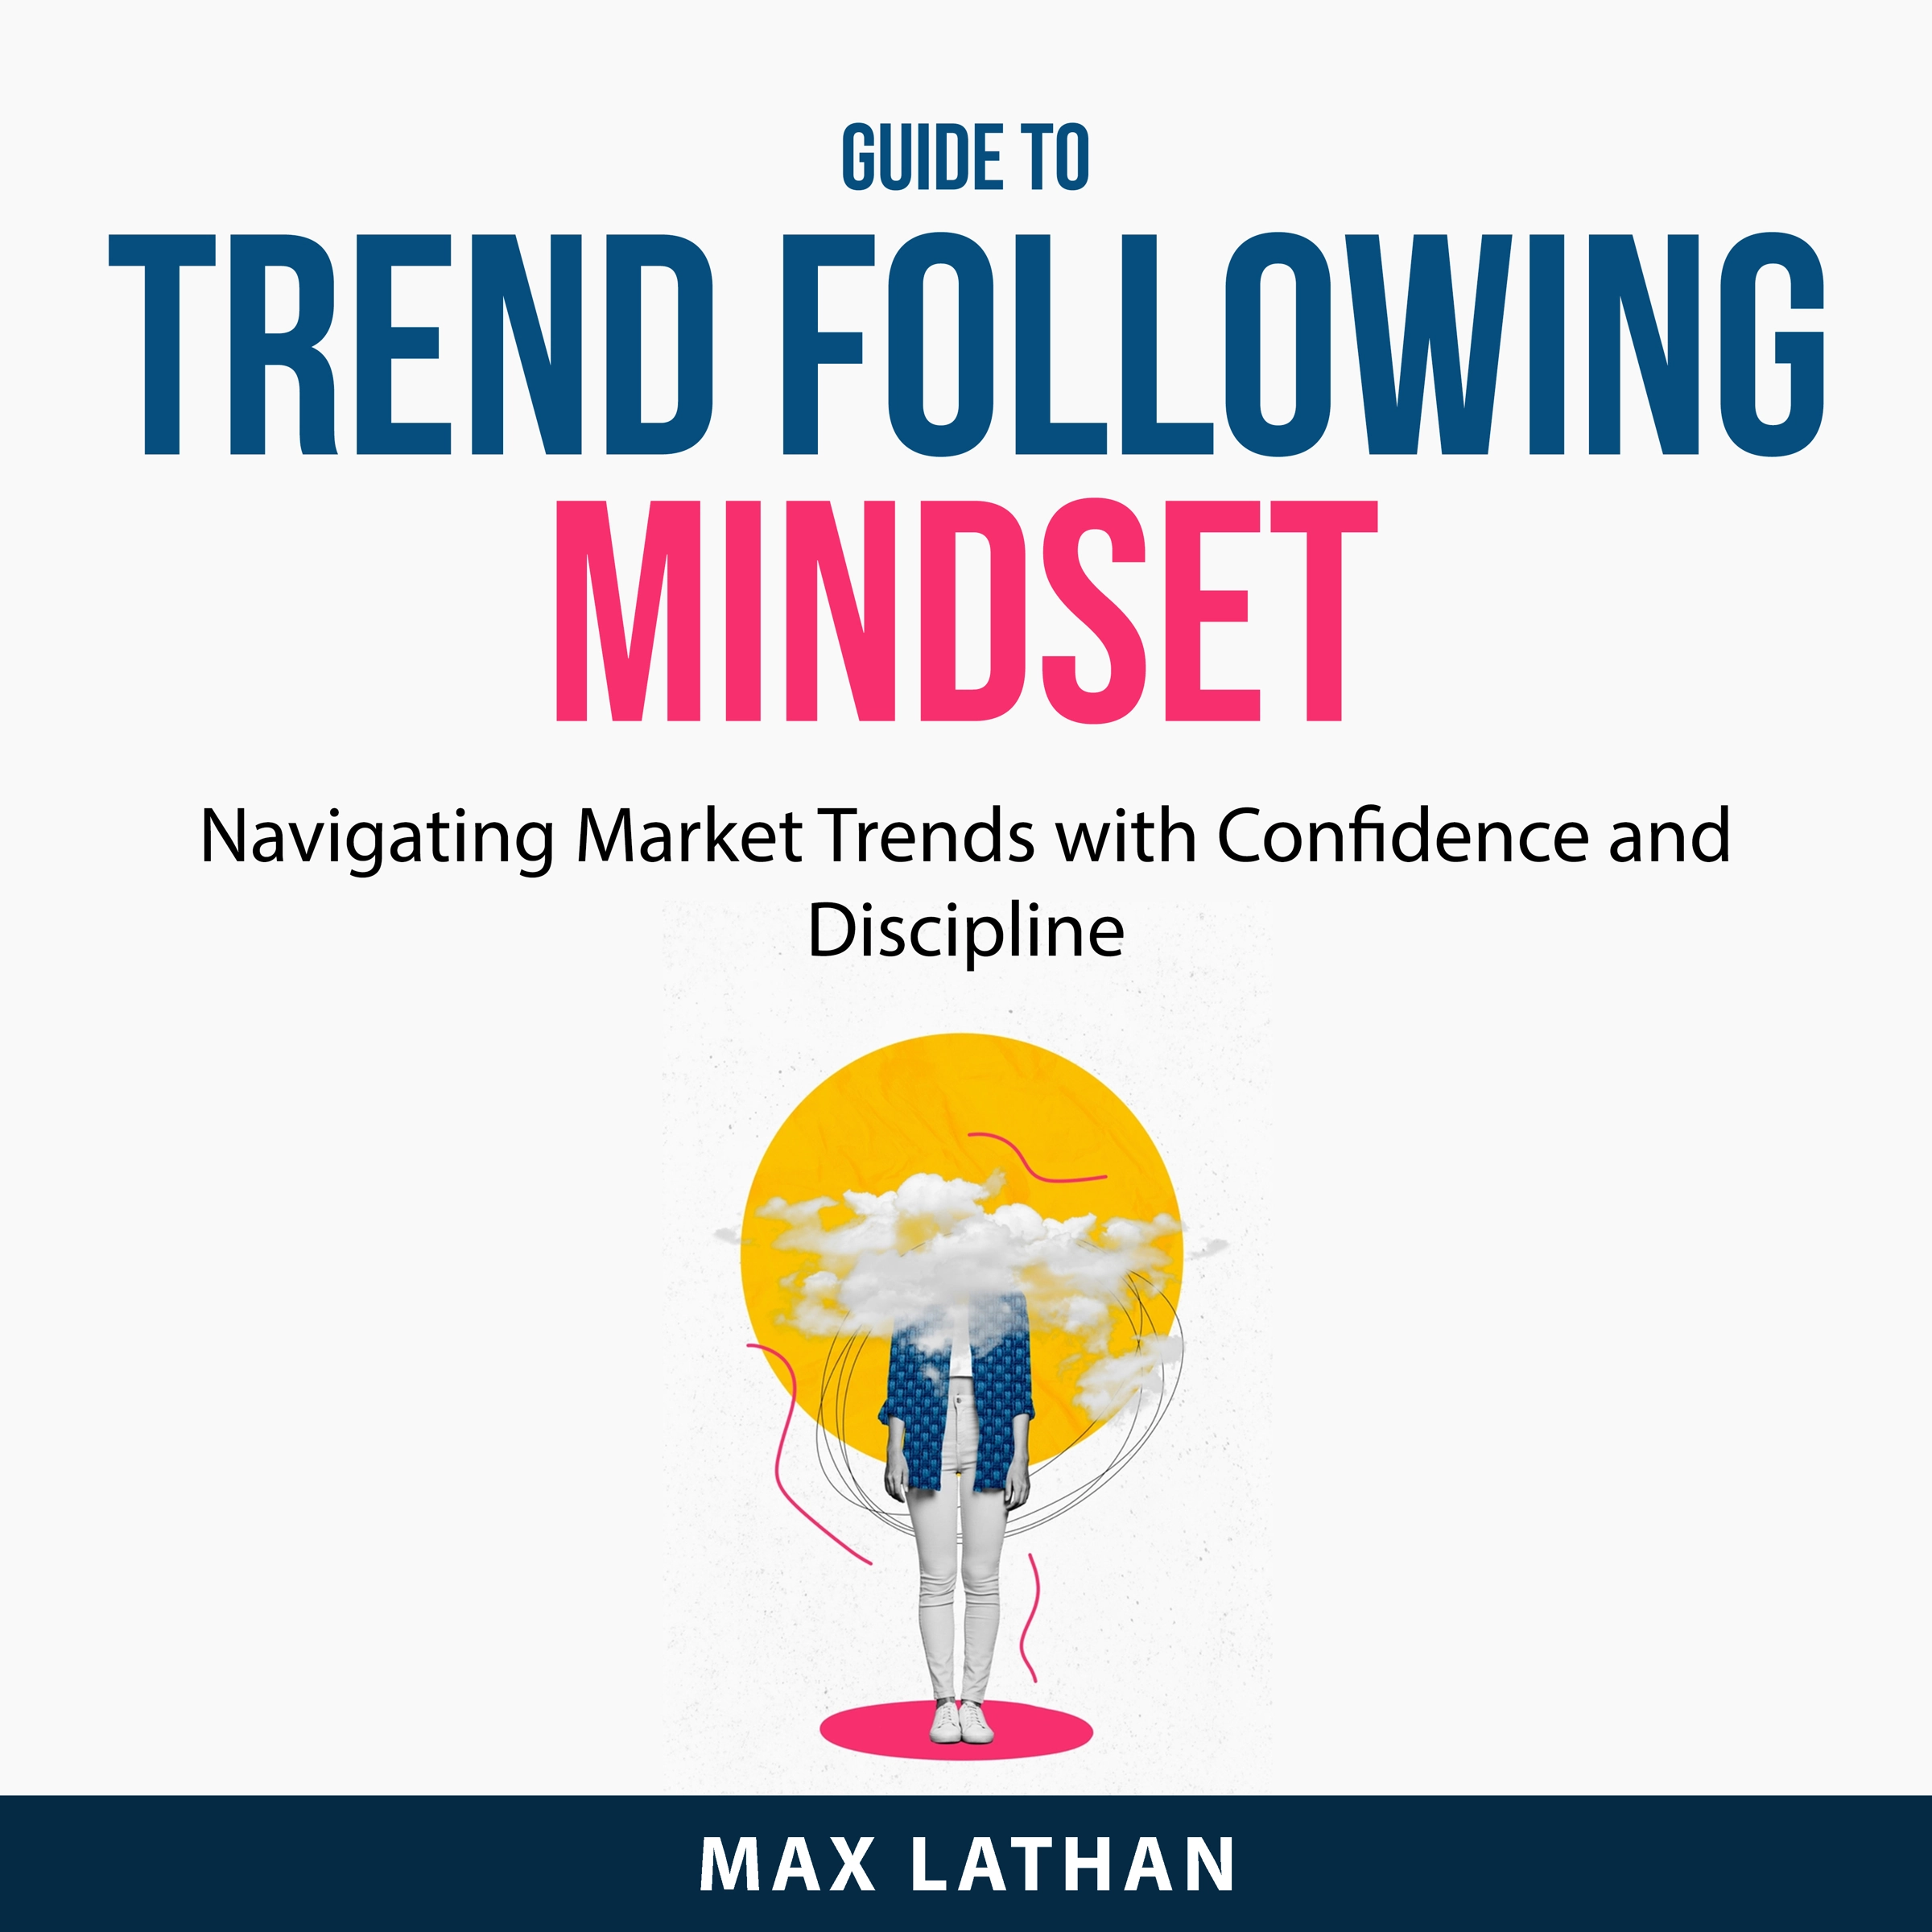 Guide to Trend Following Mindset Audiobook by Max Lathan